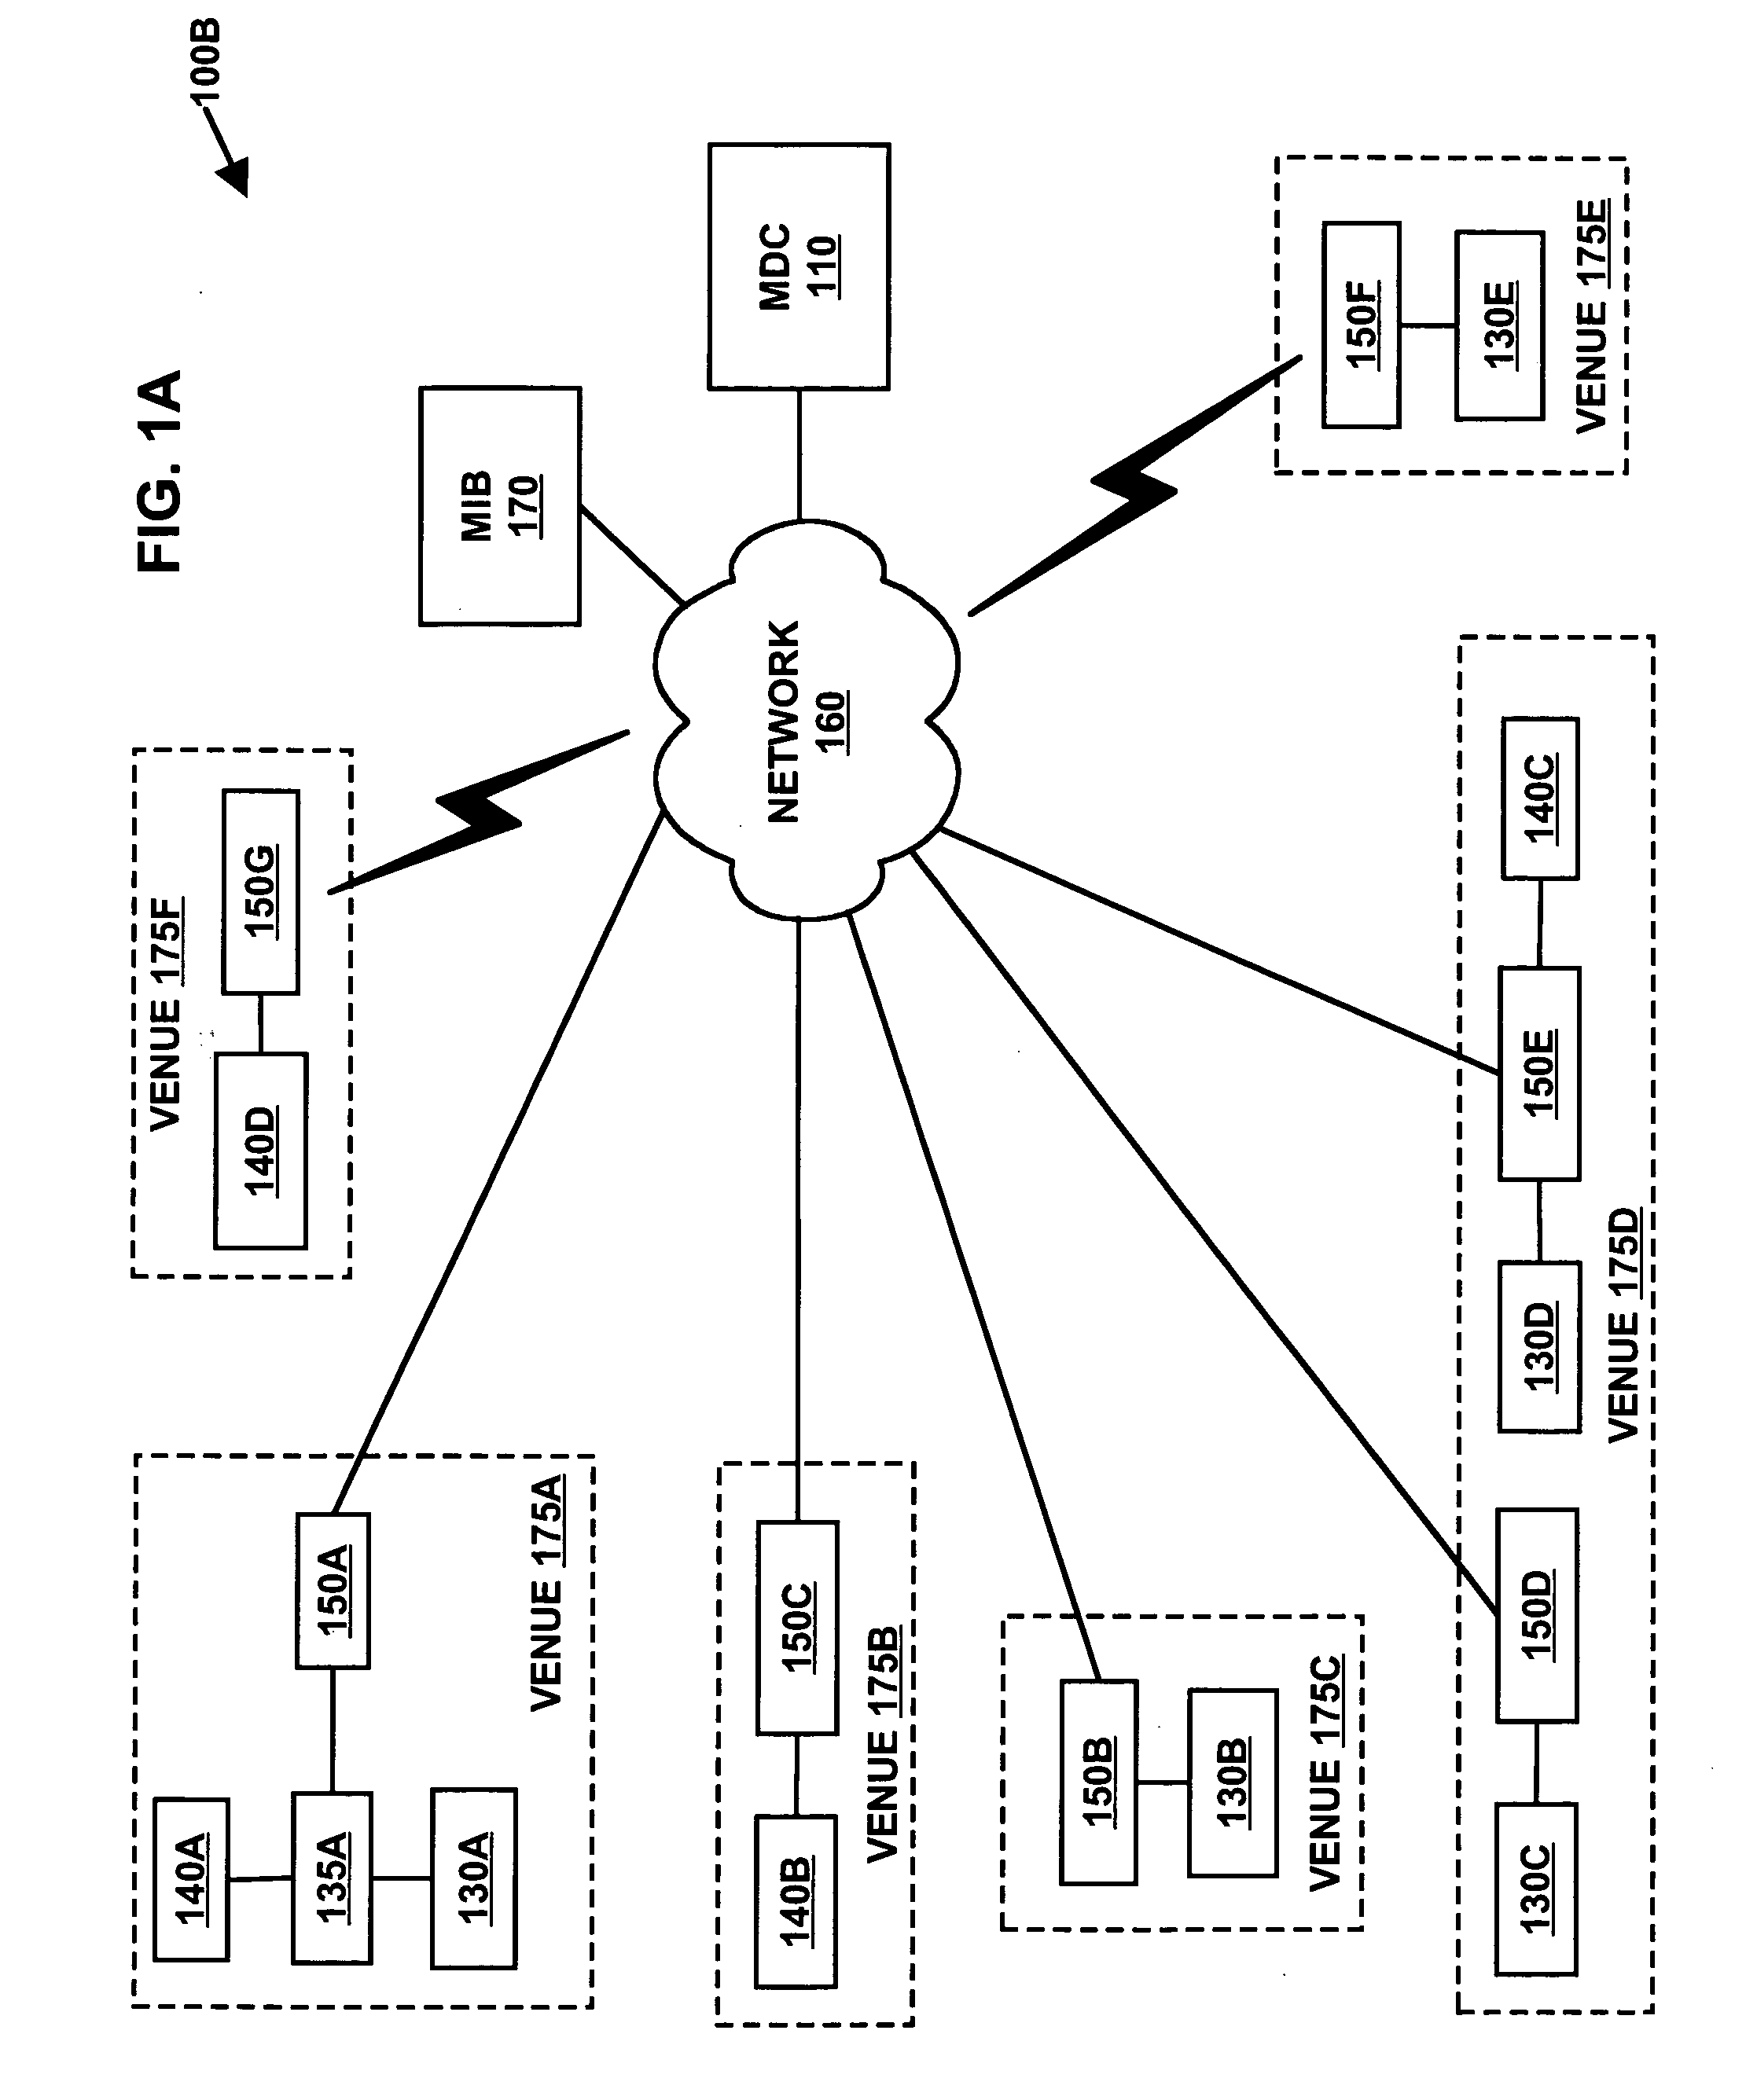 Method and system for distributing media in a private radio network